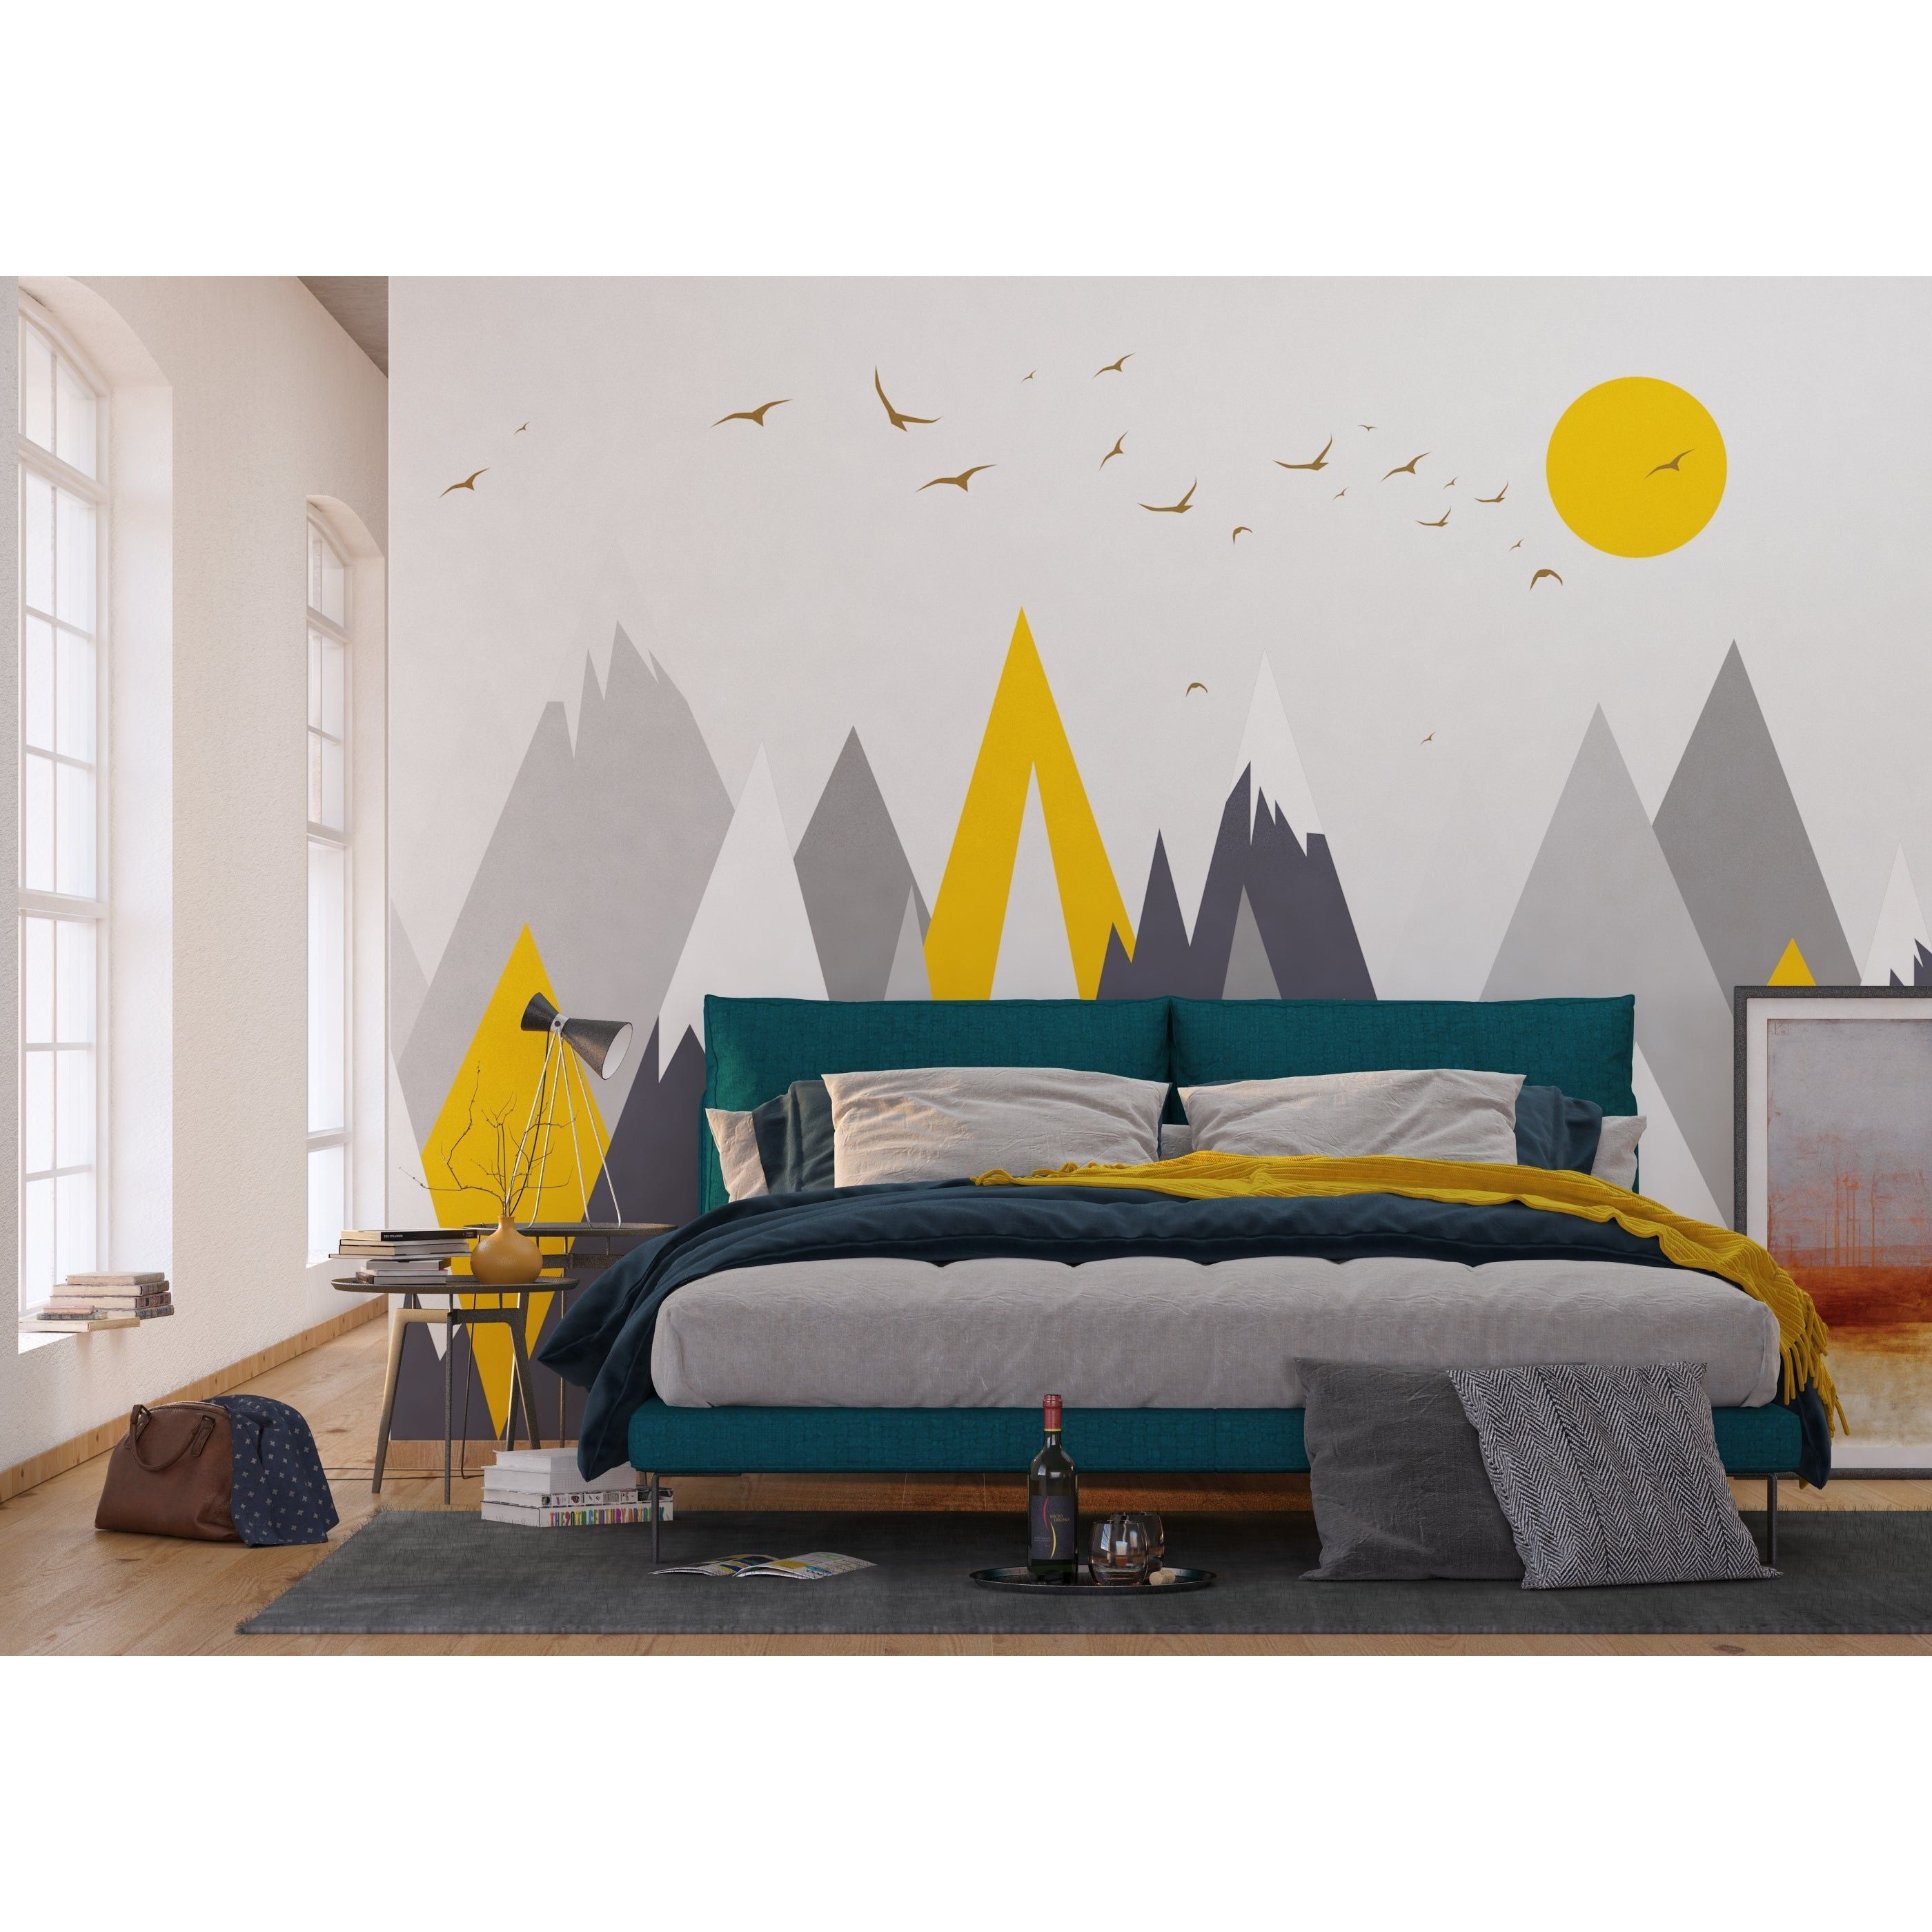 Sunshine Serenade: Children's Wall Mural with Birds and Sun